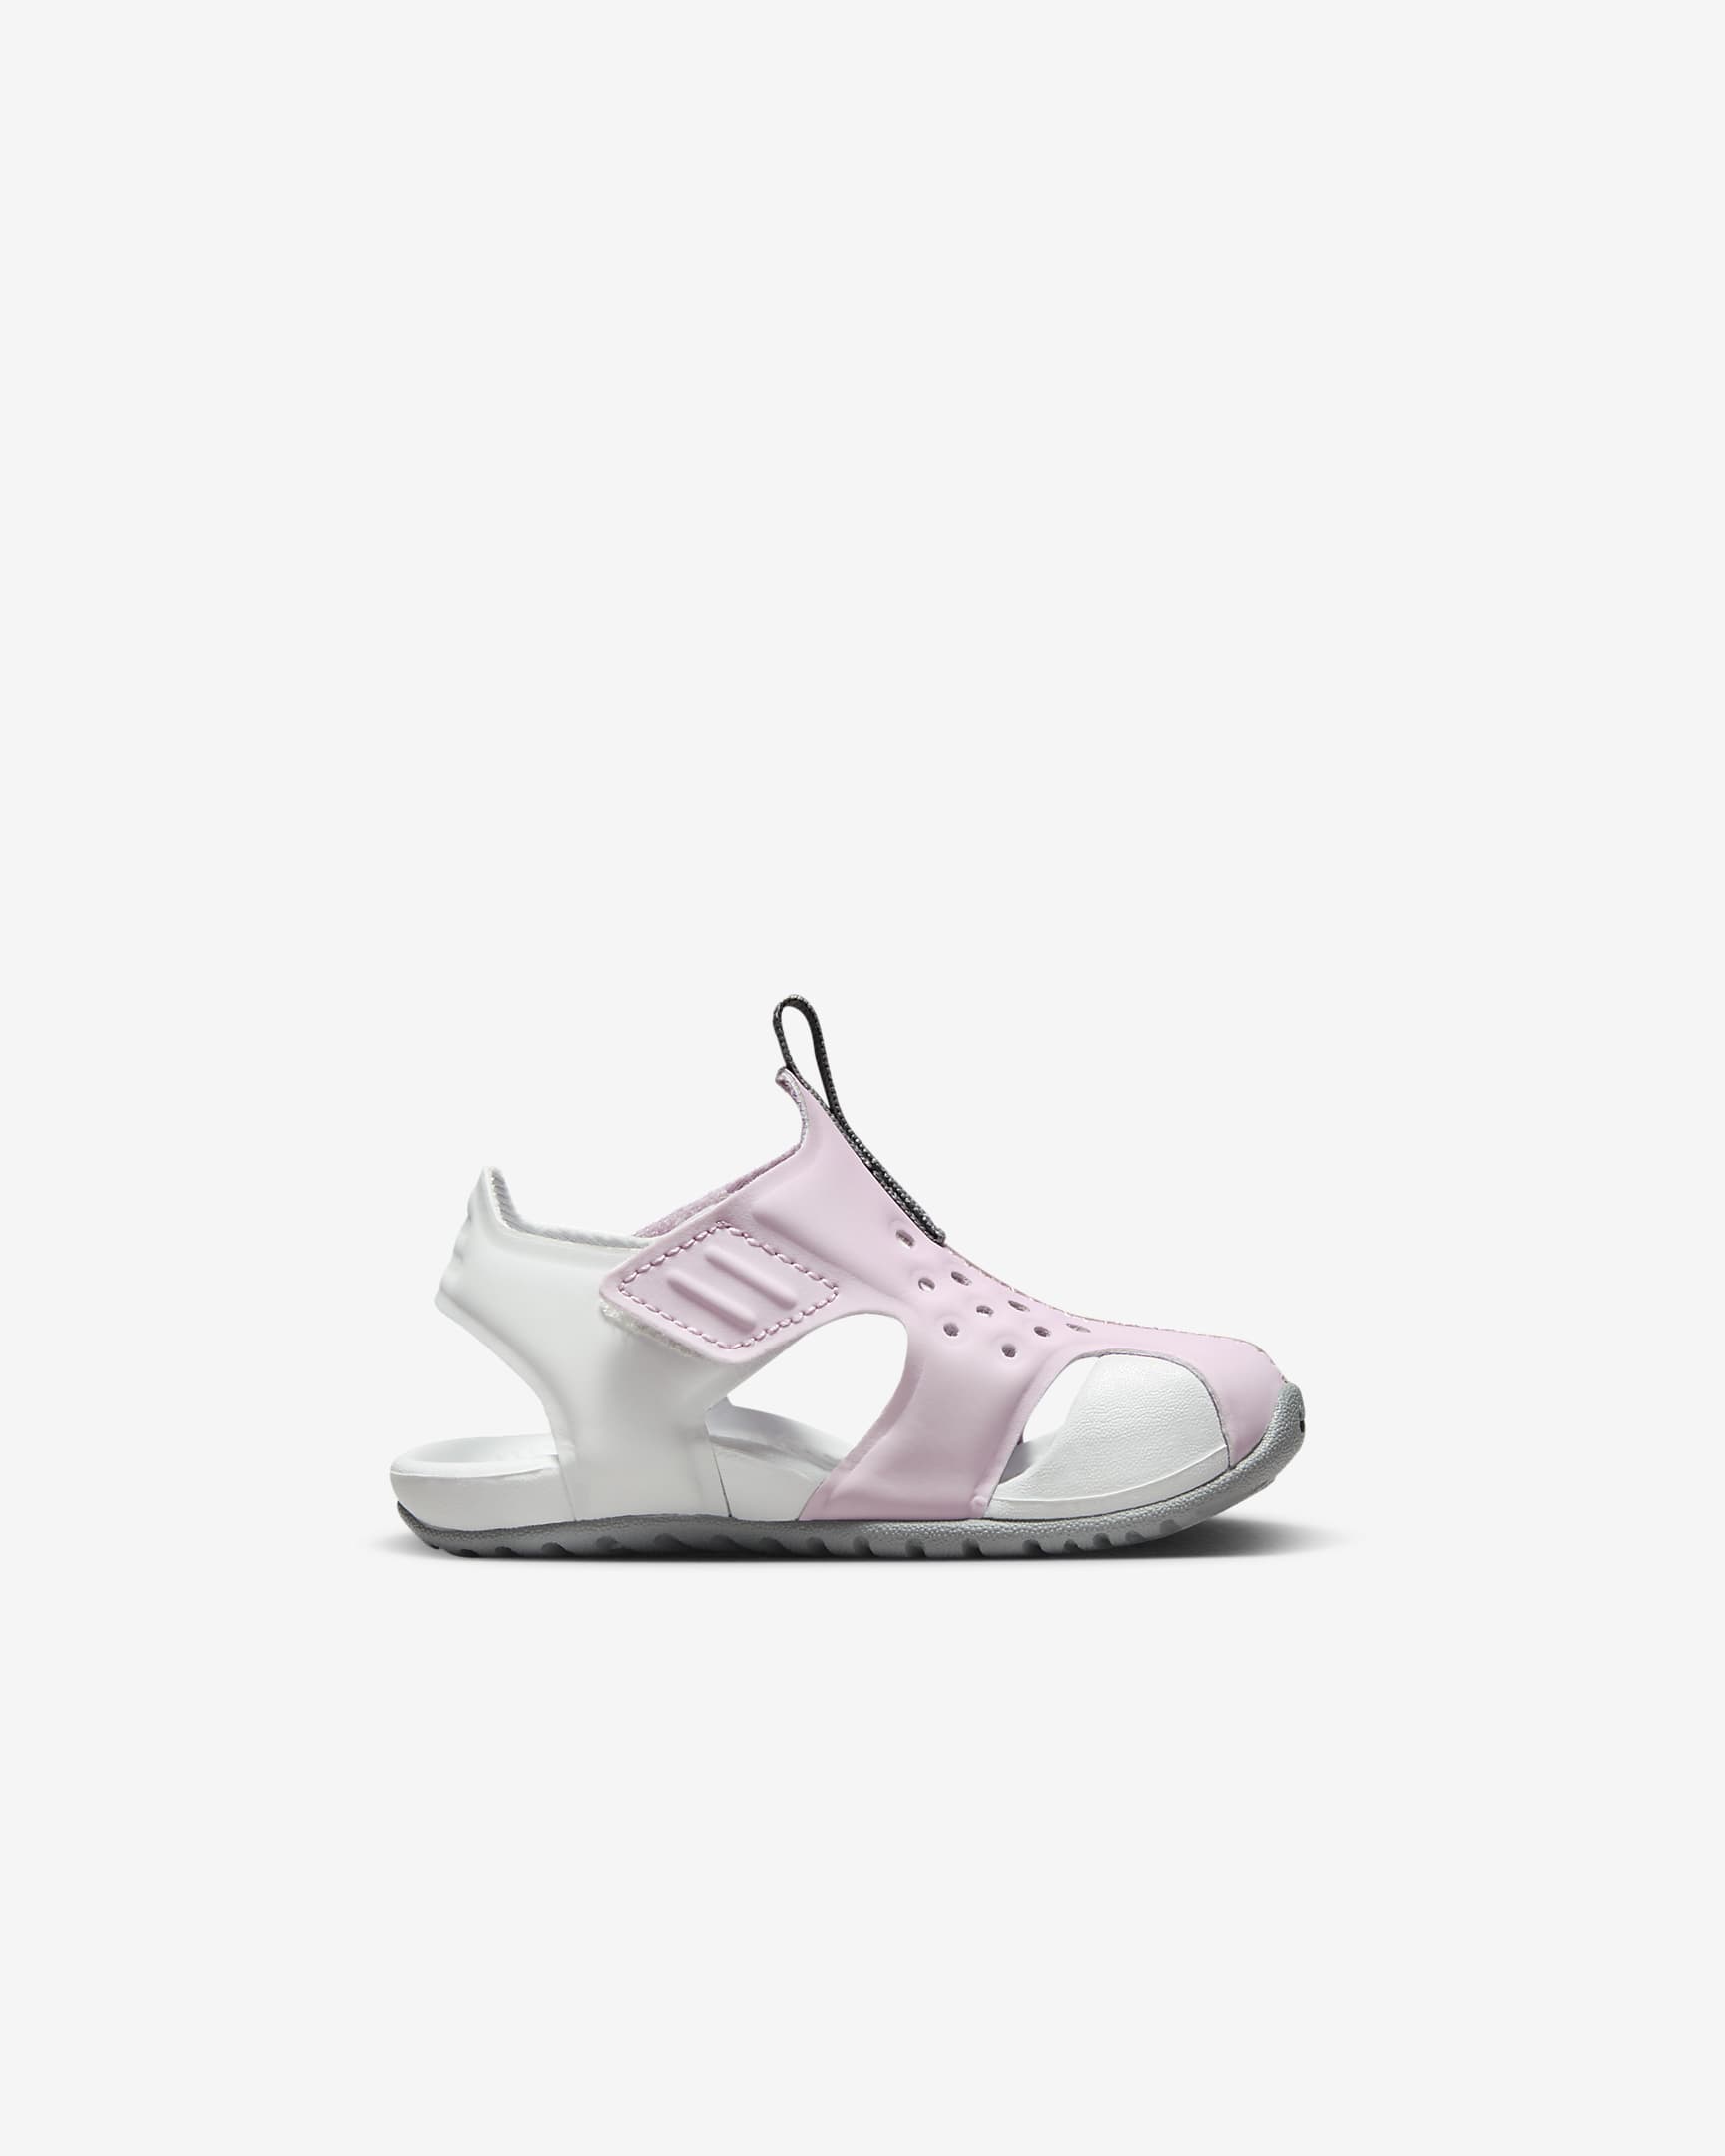 Nike Sunray Protect 2 Baby/Toddler Sandals. Nike IL